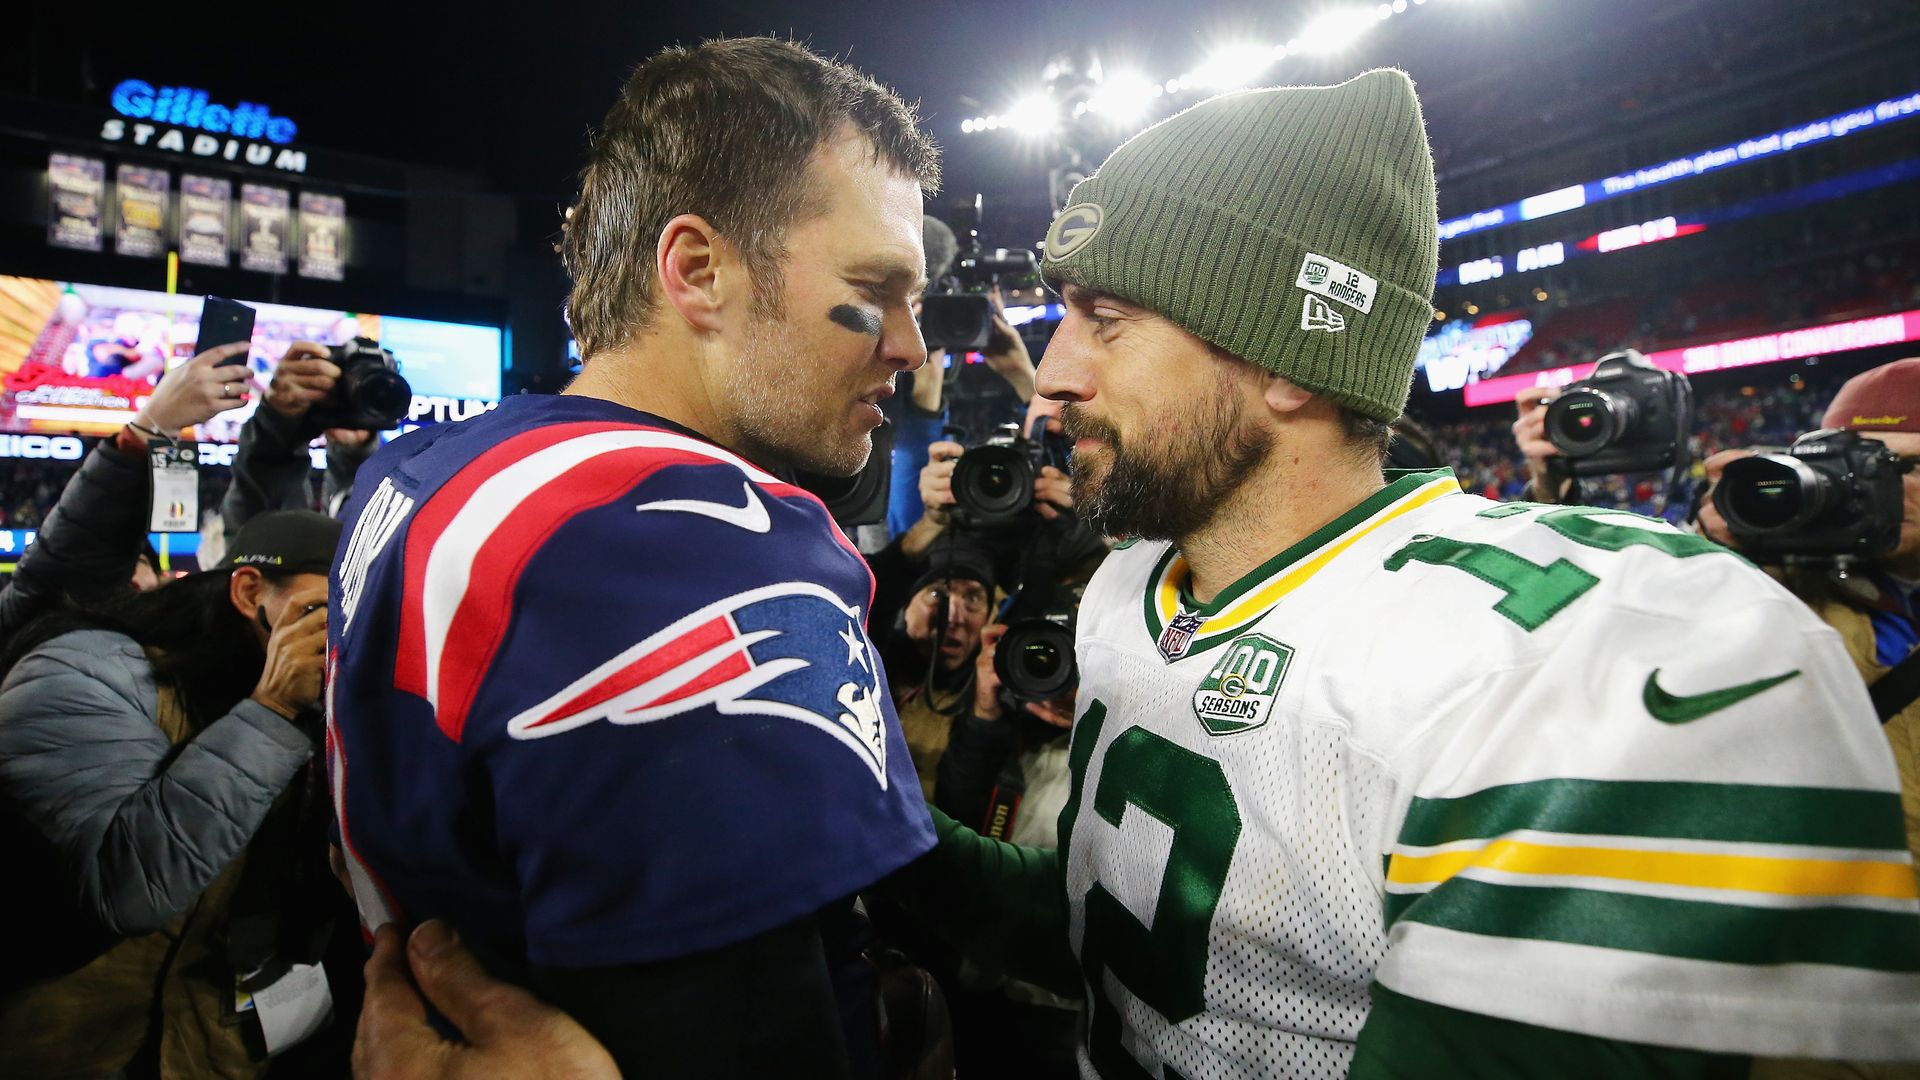 Aaron Rodgers and Tom Brady